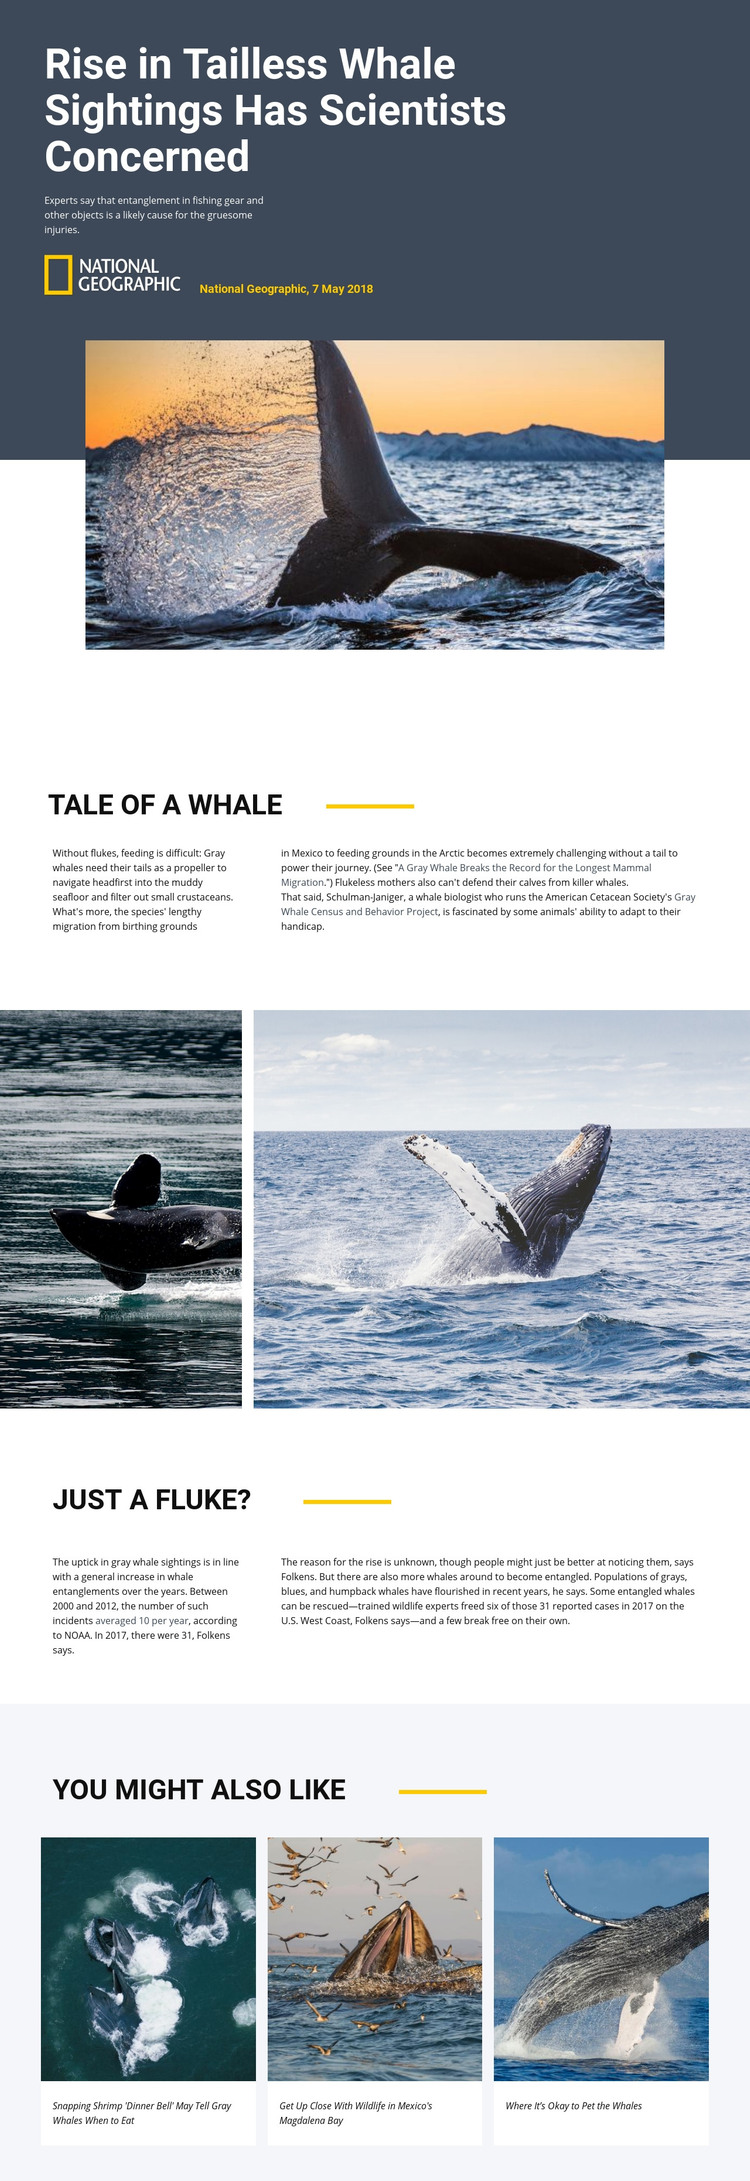 Whale watching center Homepage Design